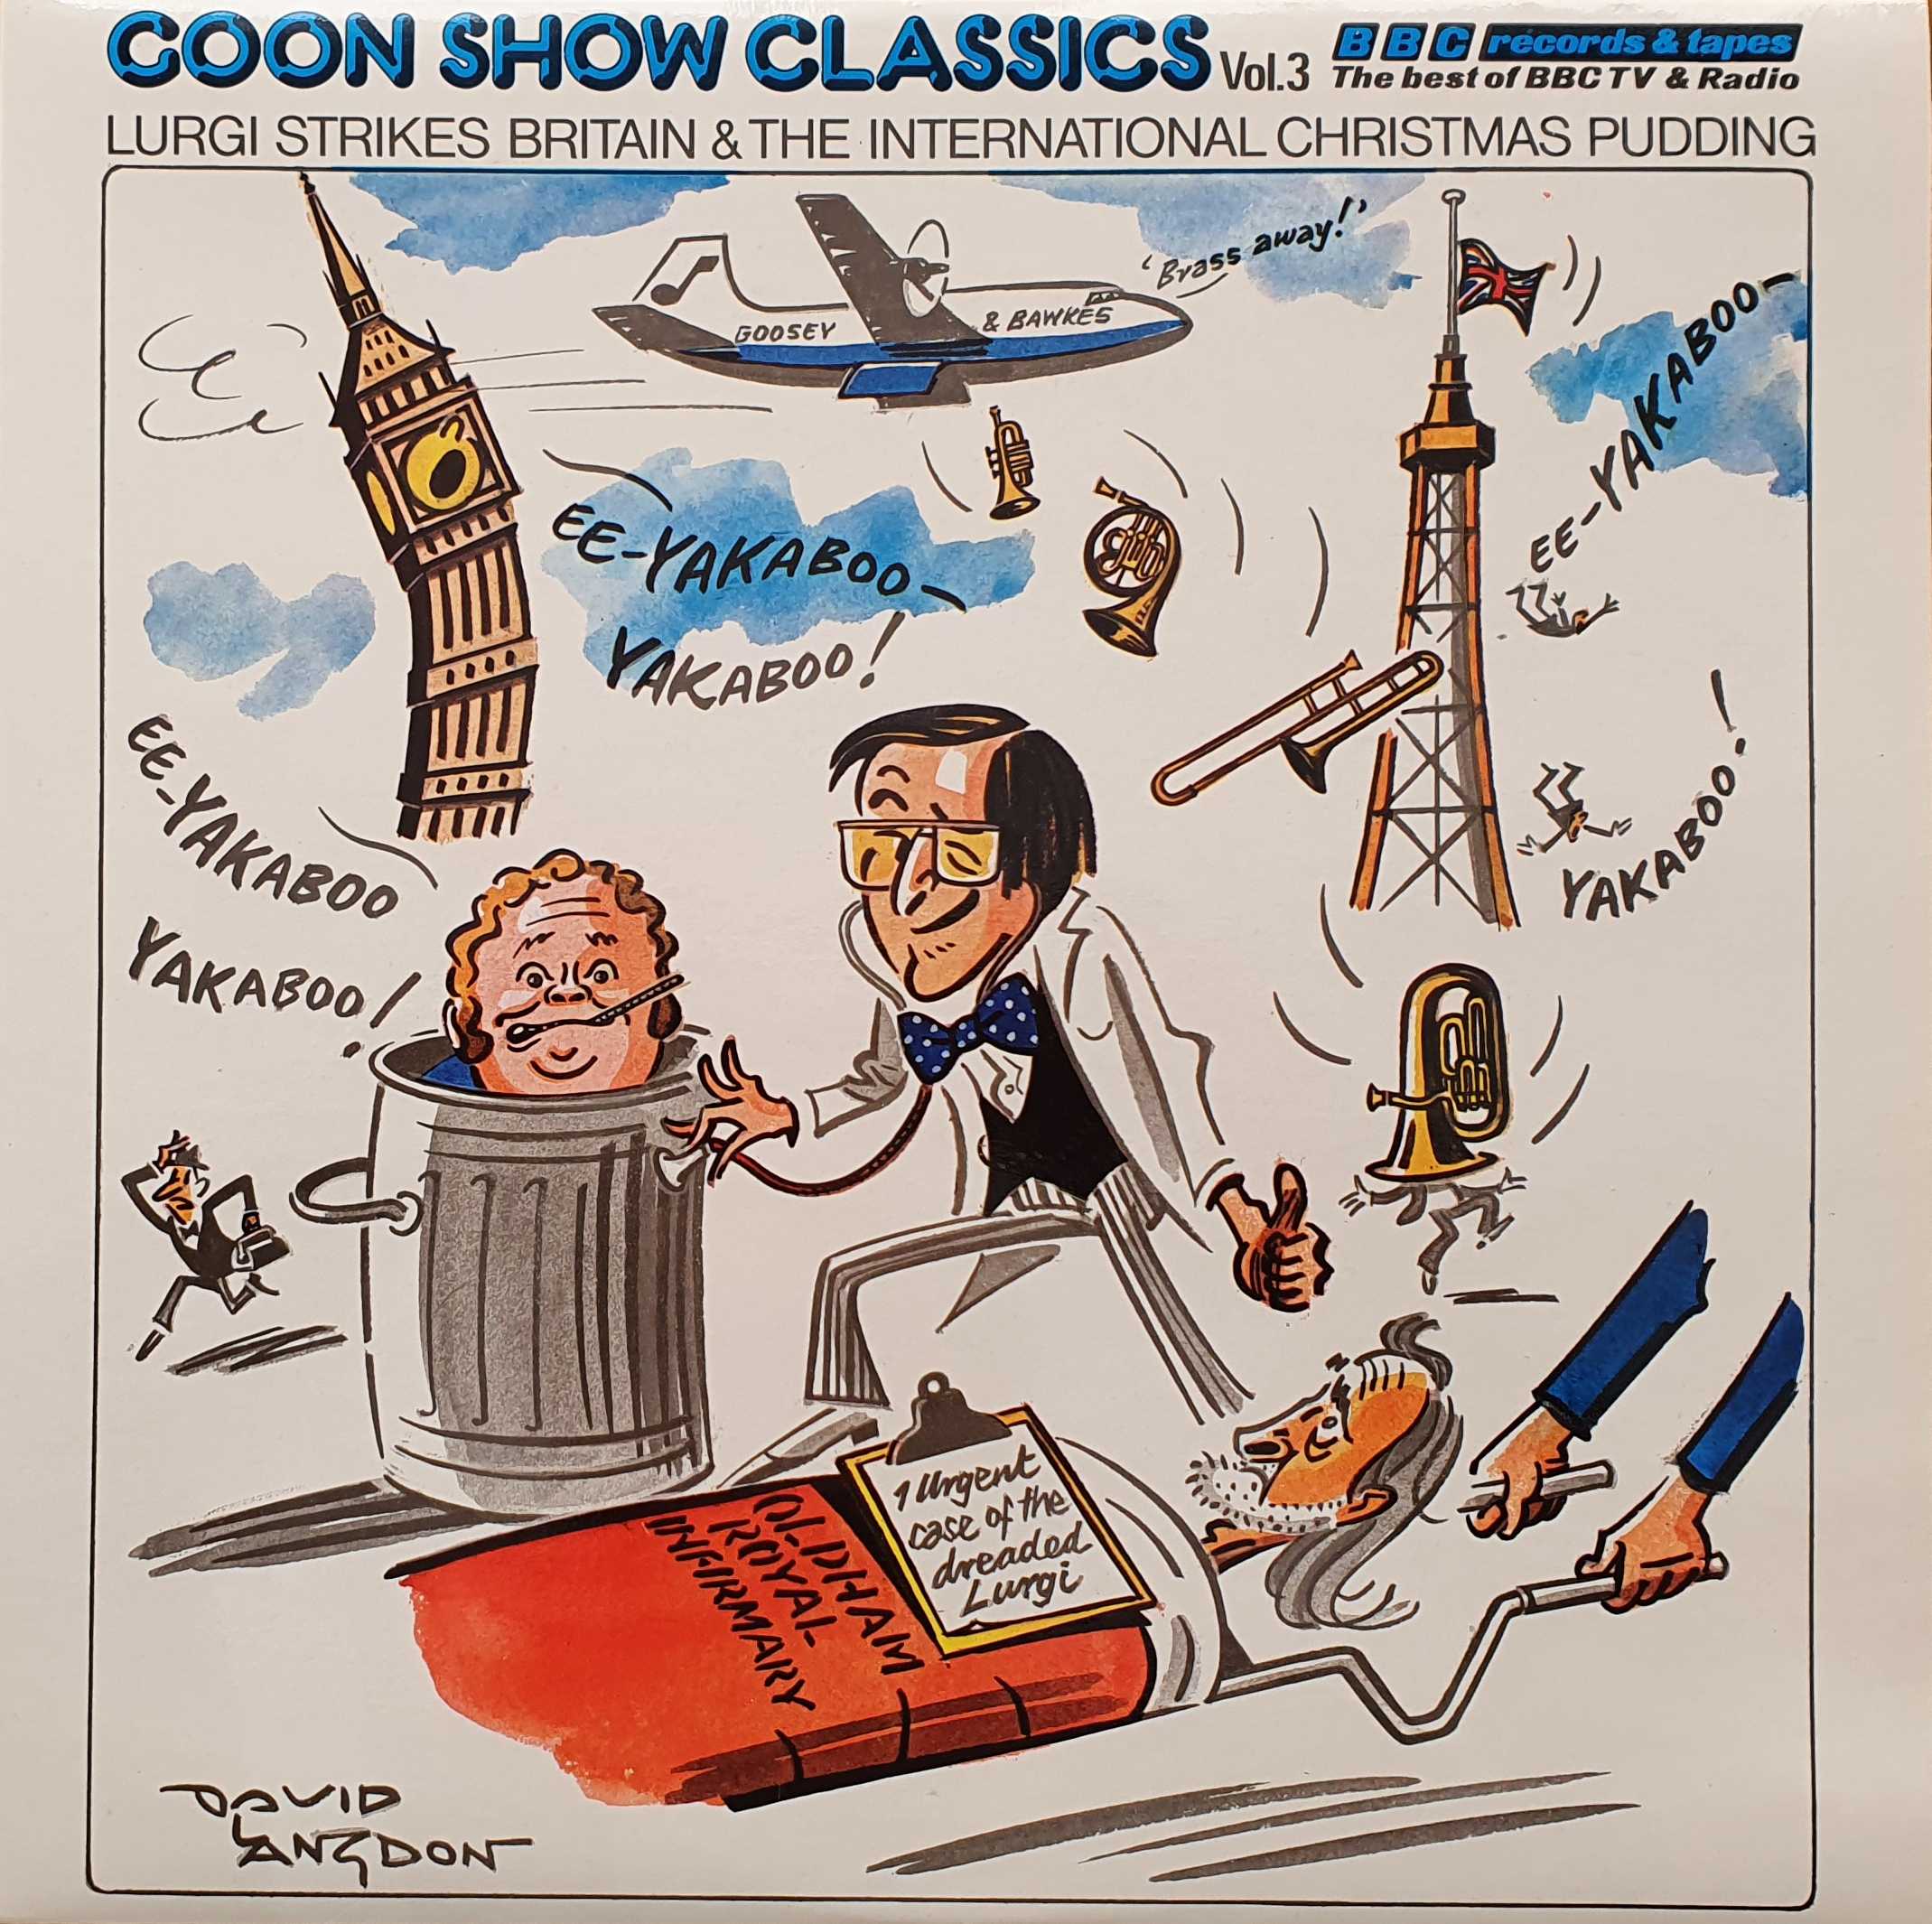 Picture of 2964 045 Goon Show classics vol. 3 by artist The Goon Show from the BBC records and Tapes library